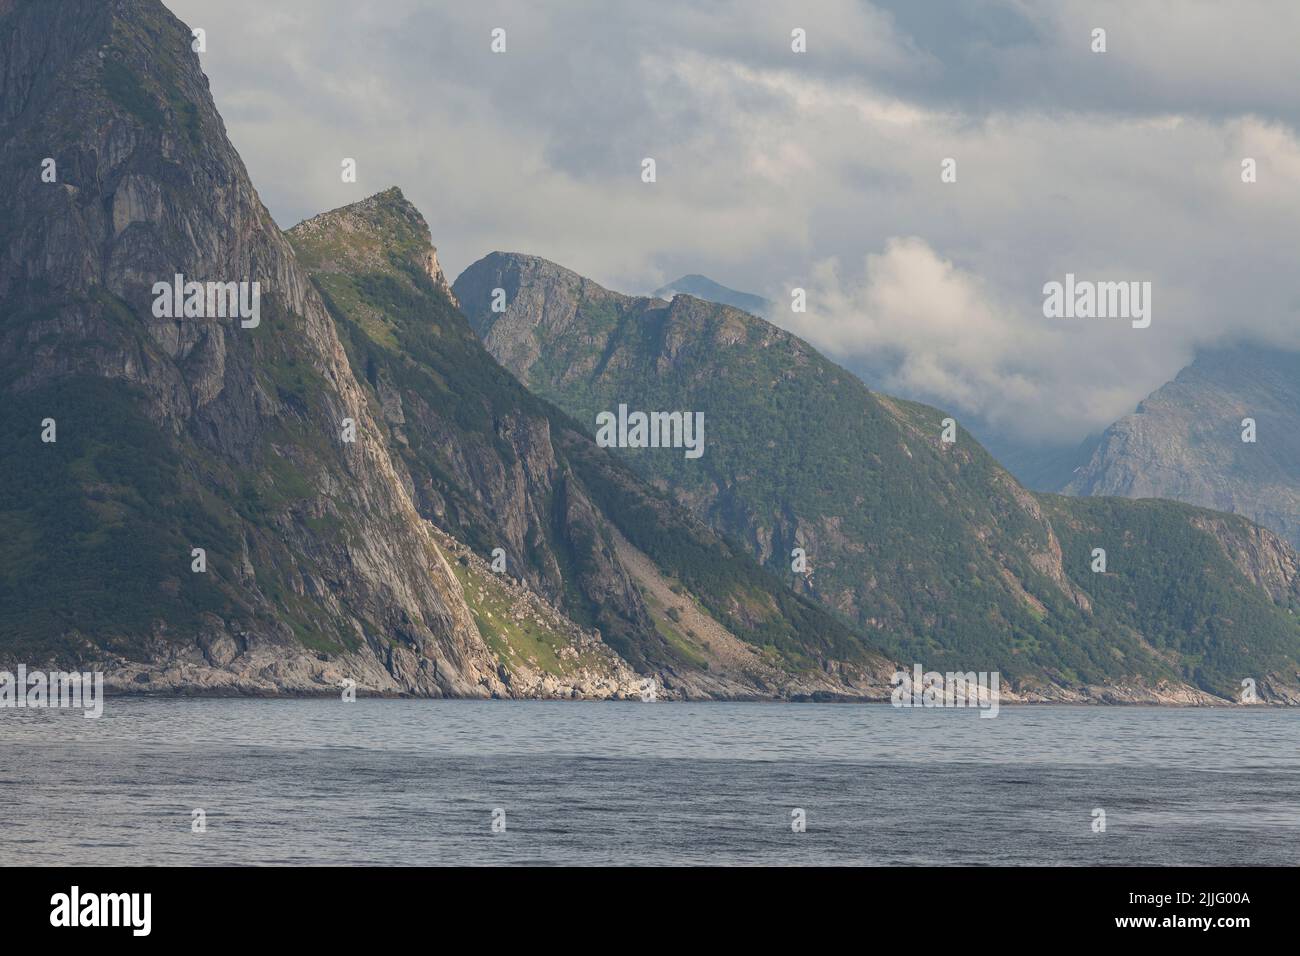 Closeup of a Norway rocky fjord with huge cliffs and a cloudy sky. Stock Photo